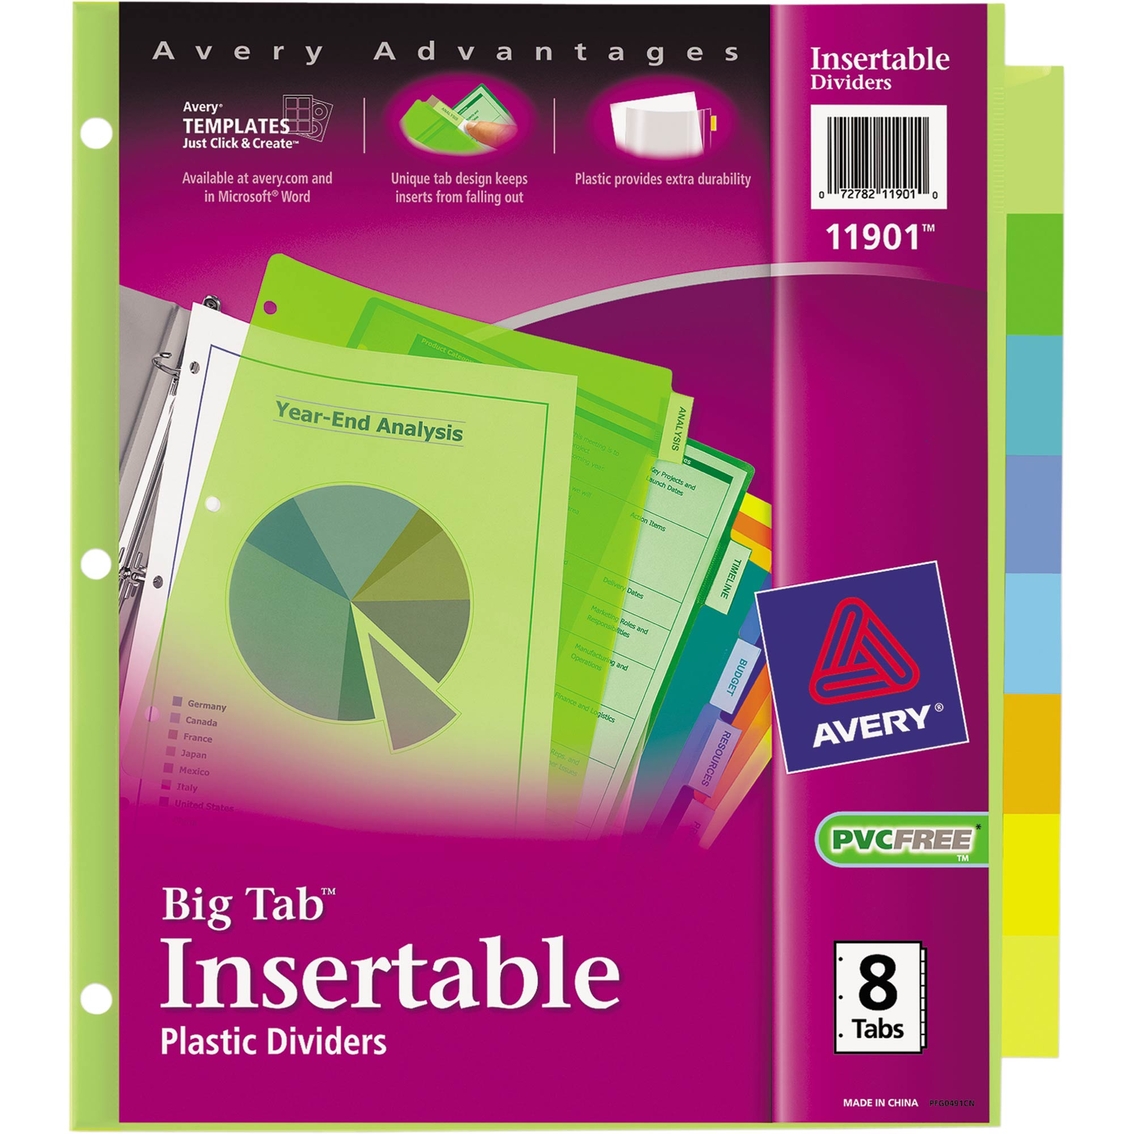 Avery Big Tab Plastic Insertable 8 Tab 11 x 8 1/2 in. Divider 8 pc. Set - Image 2 of 2